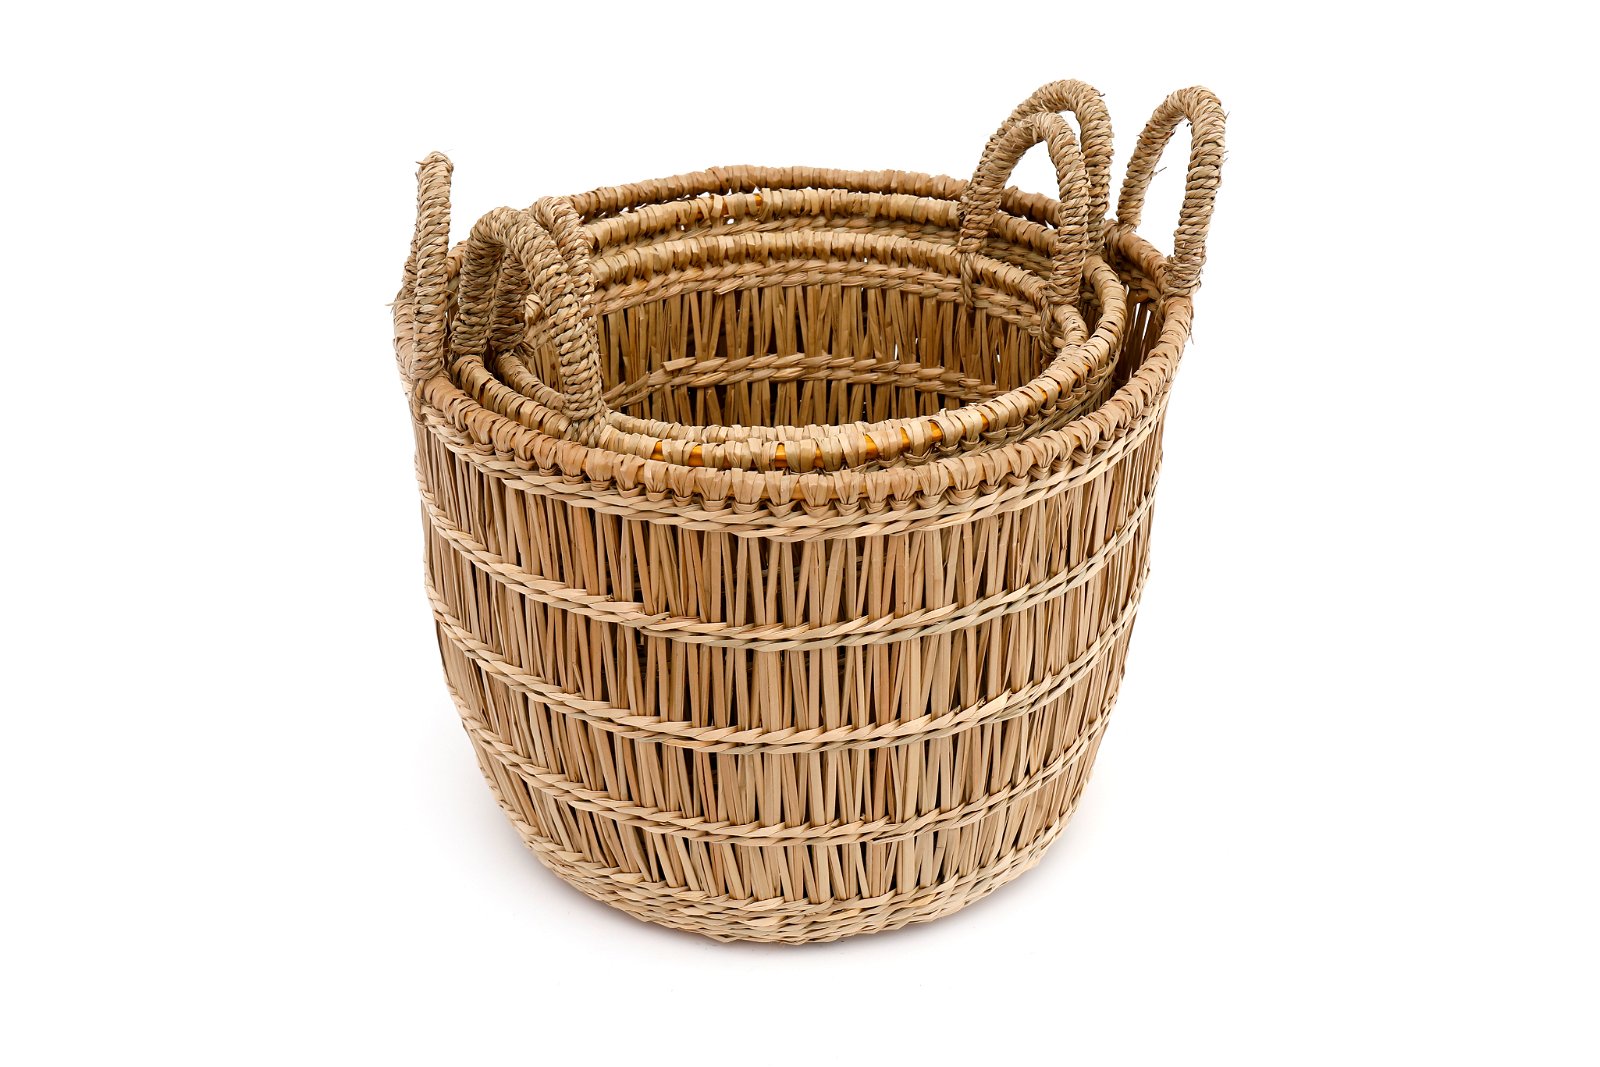 View Set of Three Dried Seagrass Baskets information